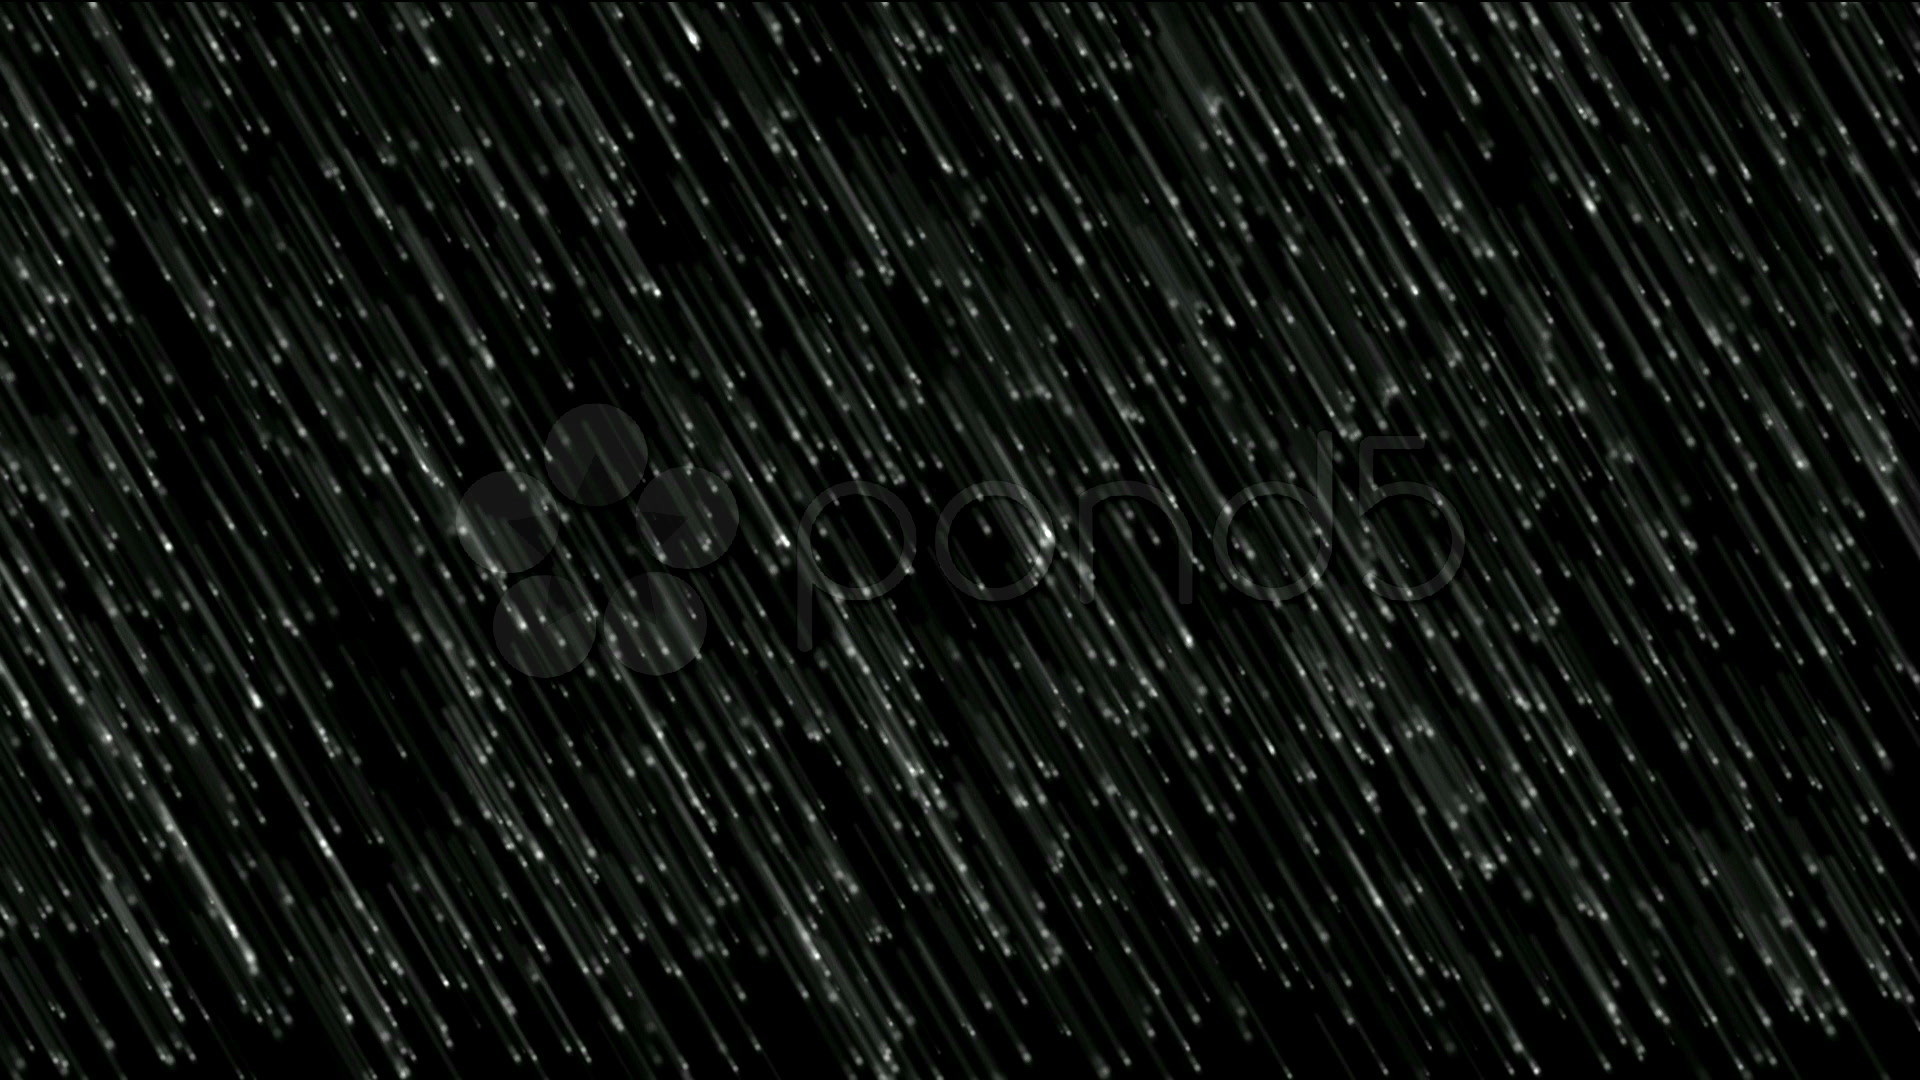 1920x1080 Displaying 18> Images For - Falling Rain Background Animated.